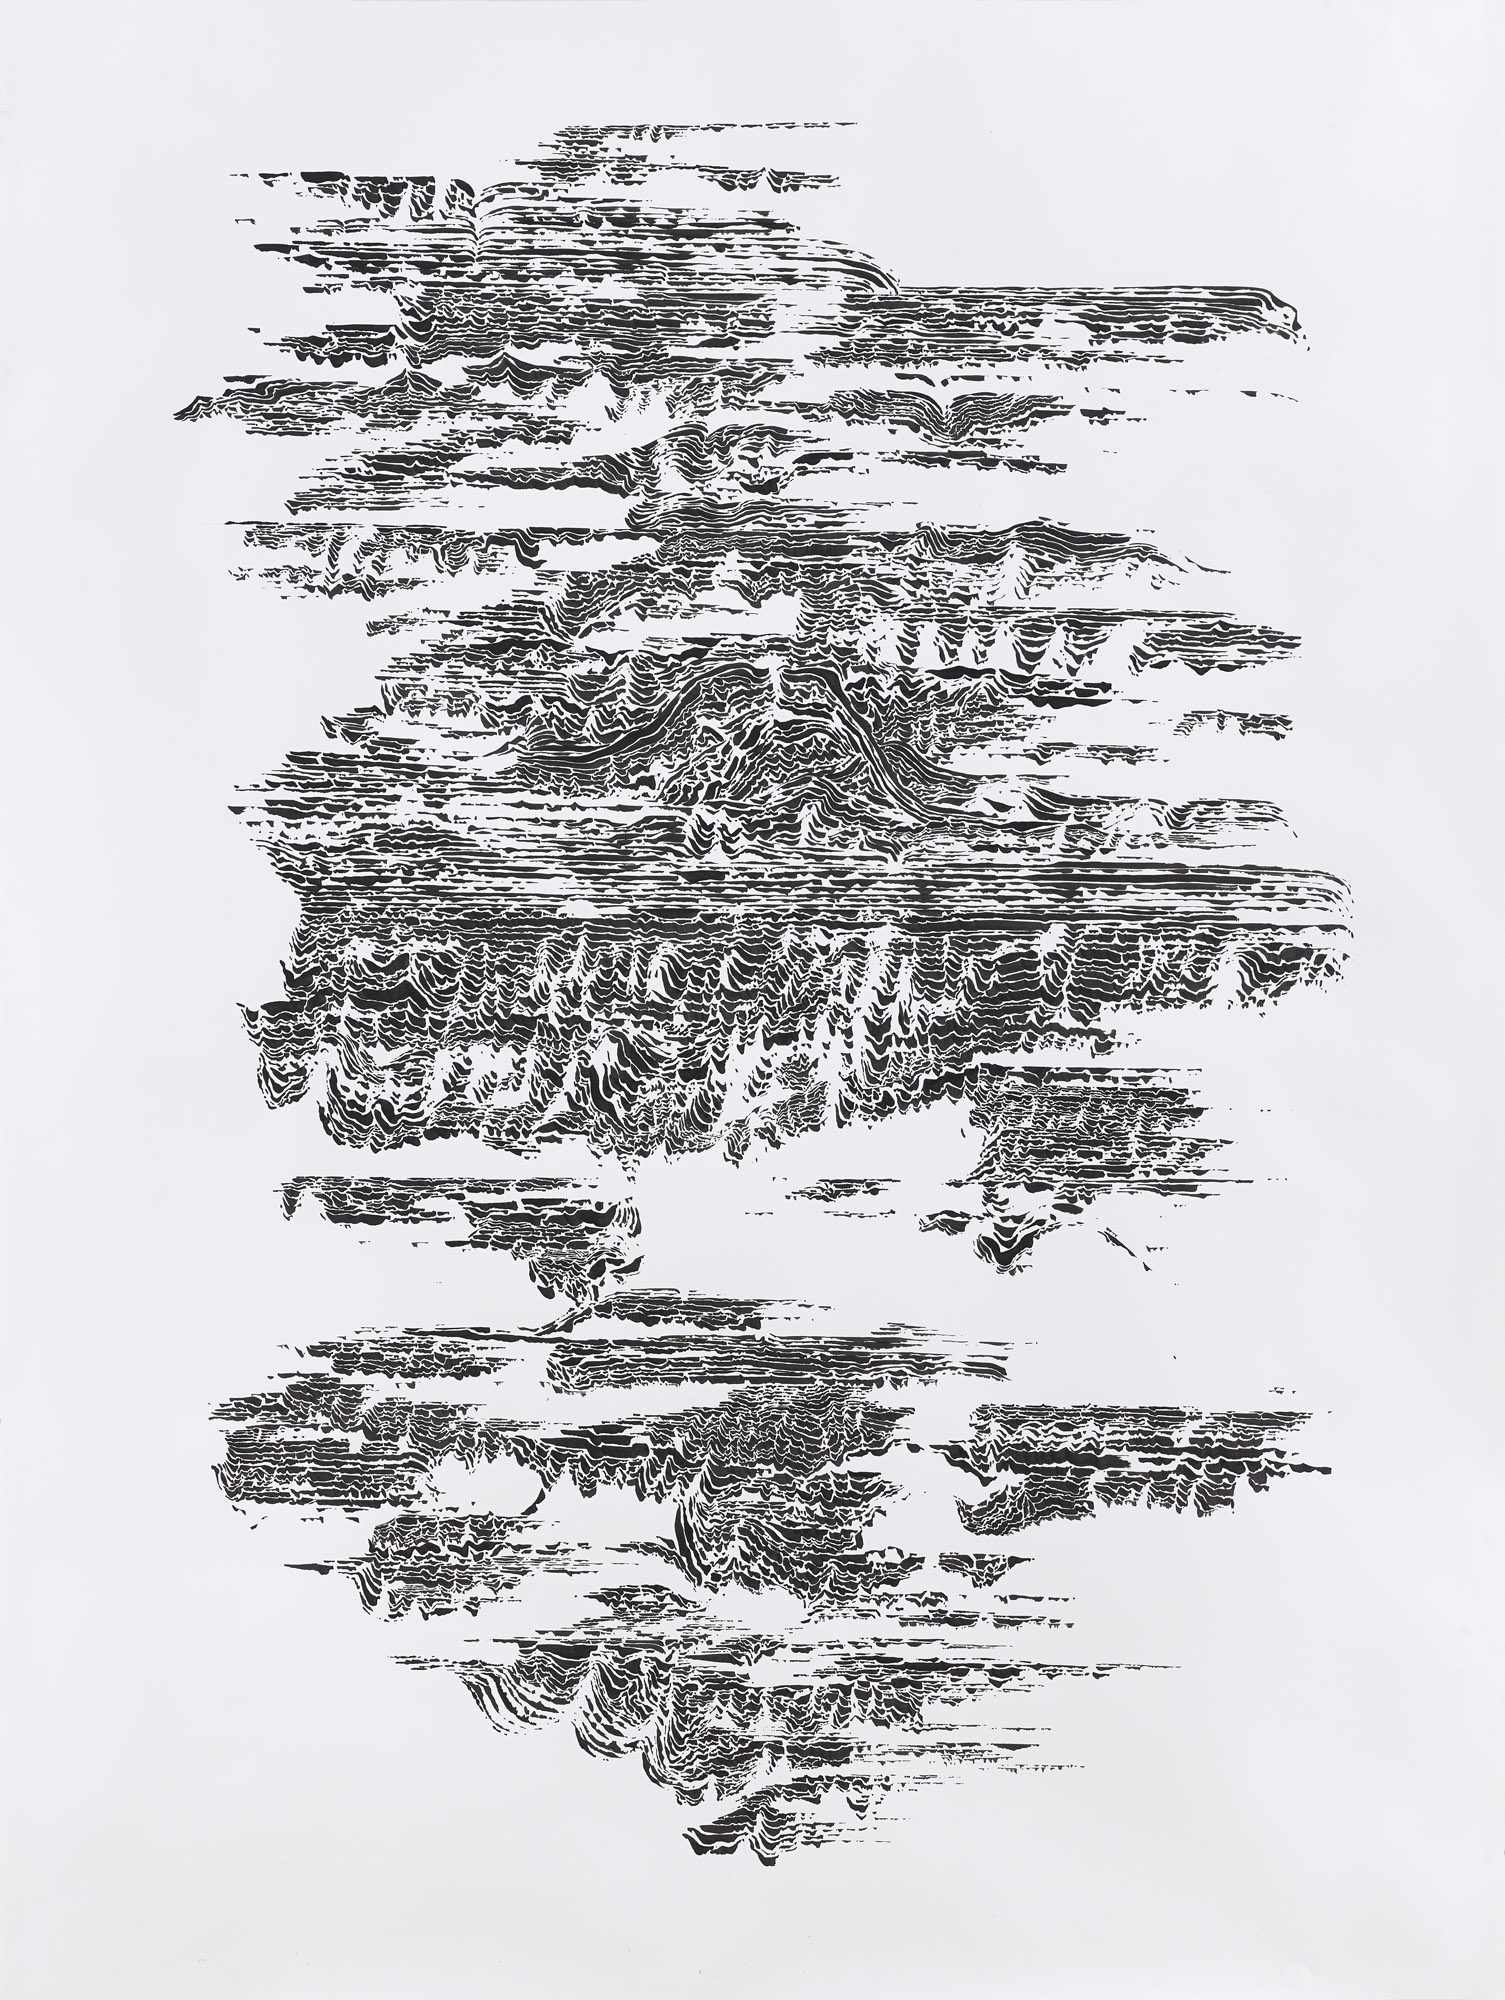 BK P7440 / untitled / ink on paper / 200x150cm / 2015 | private collection berlin